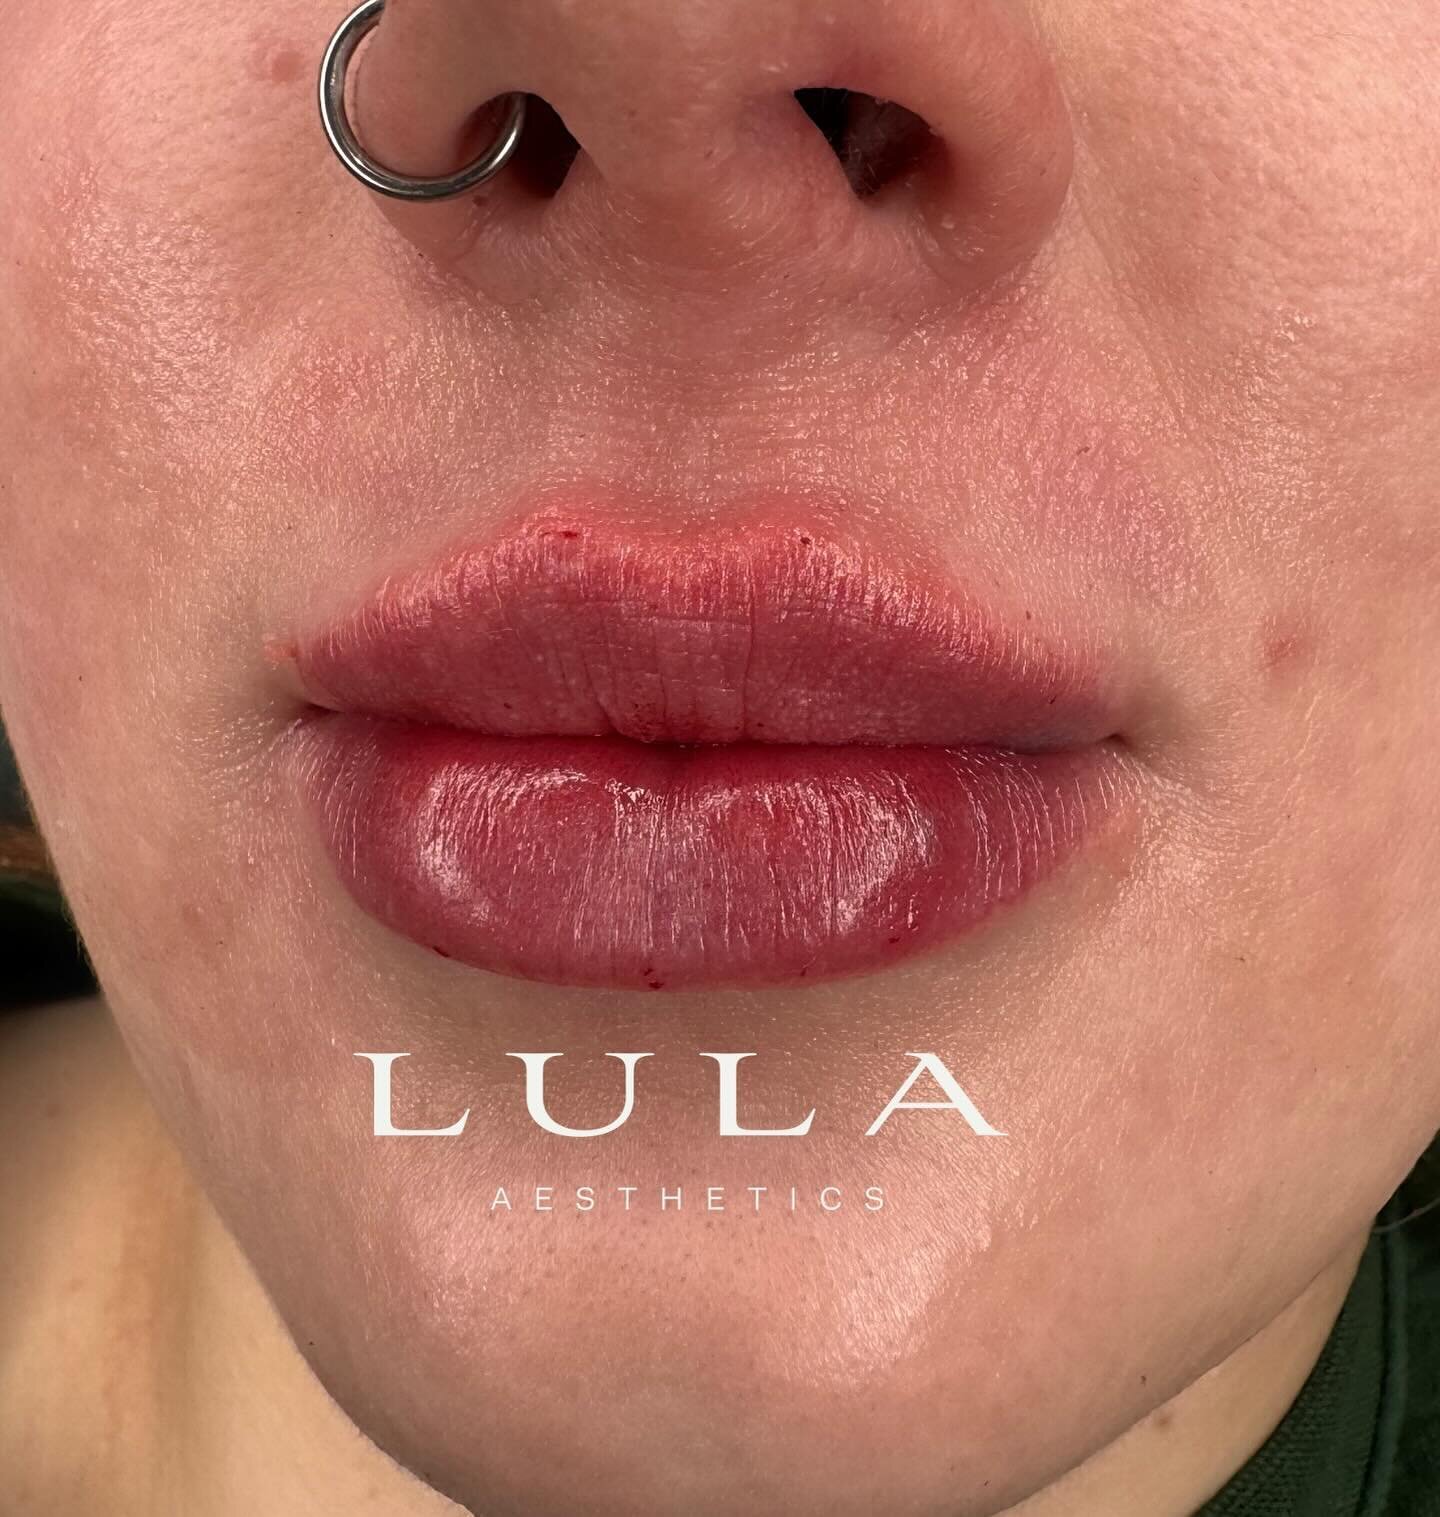 Lip augmentation by RN Mads. 

6-12 month longevity. 

Cosmetic procedures come with risks and side effects. 

Photos used with consent. 

No results will be identical.